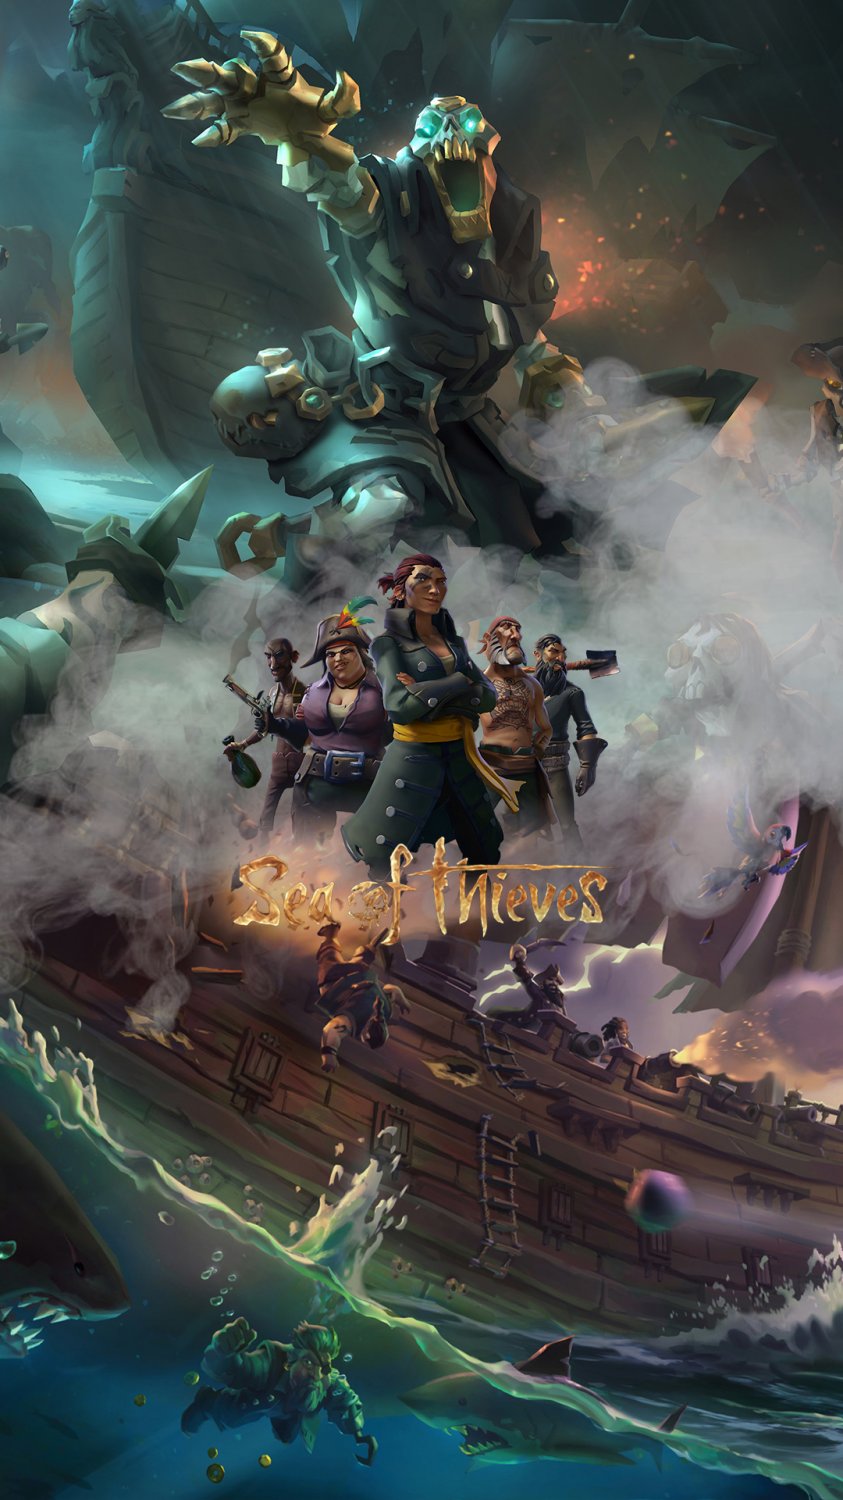 Sea of Thieves Game 13"x19" (32cm/49cm) Polyester Fabric Pos